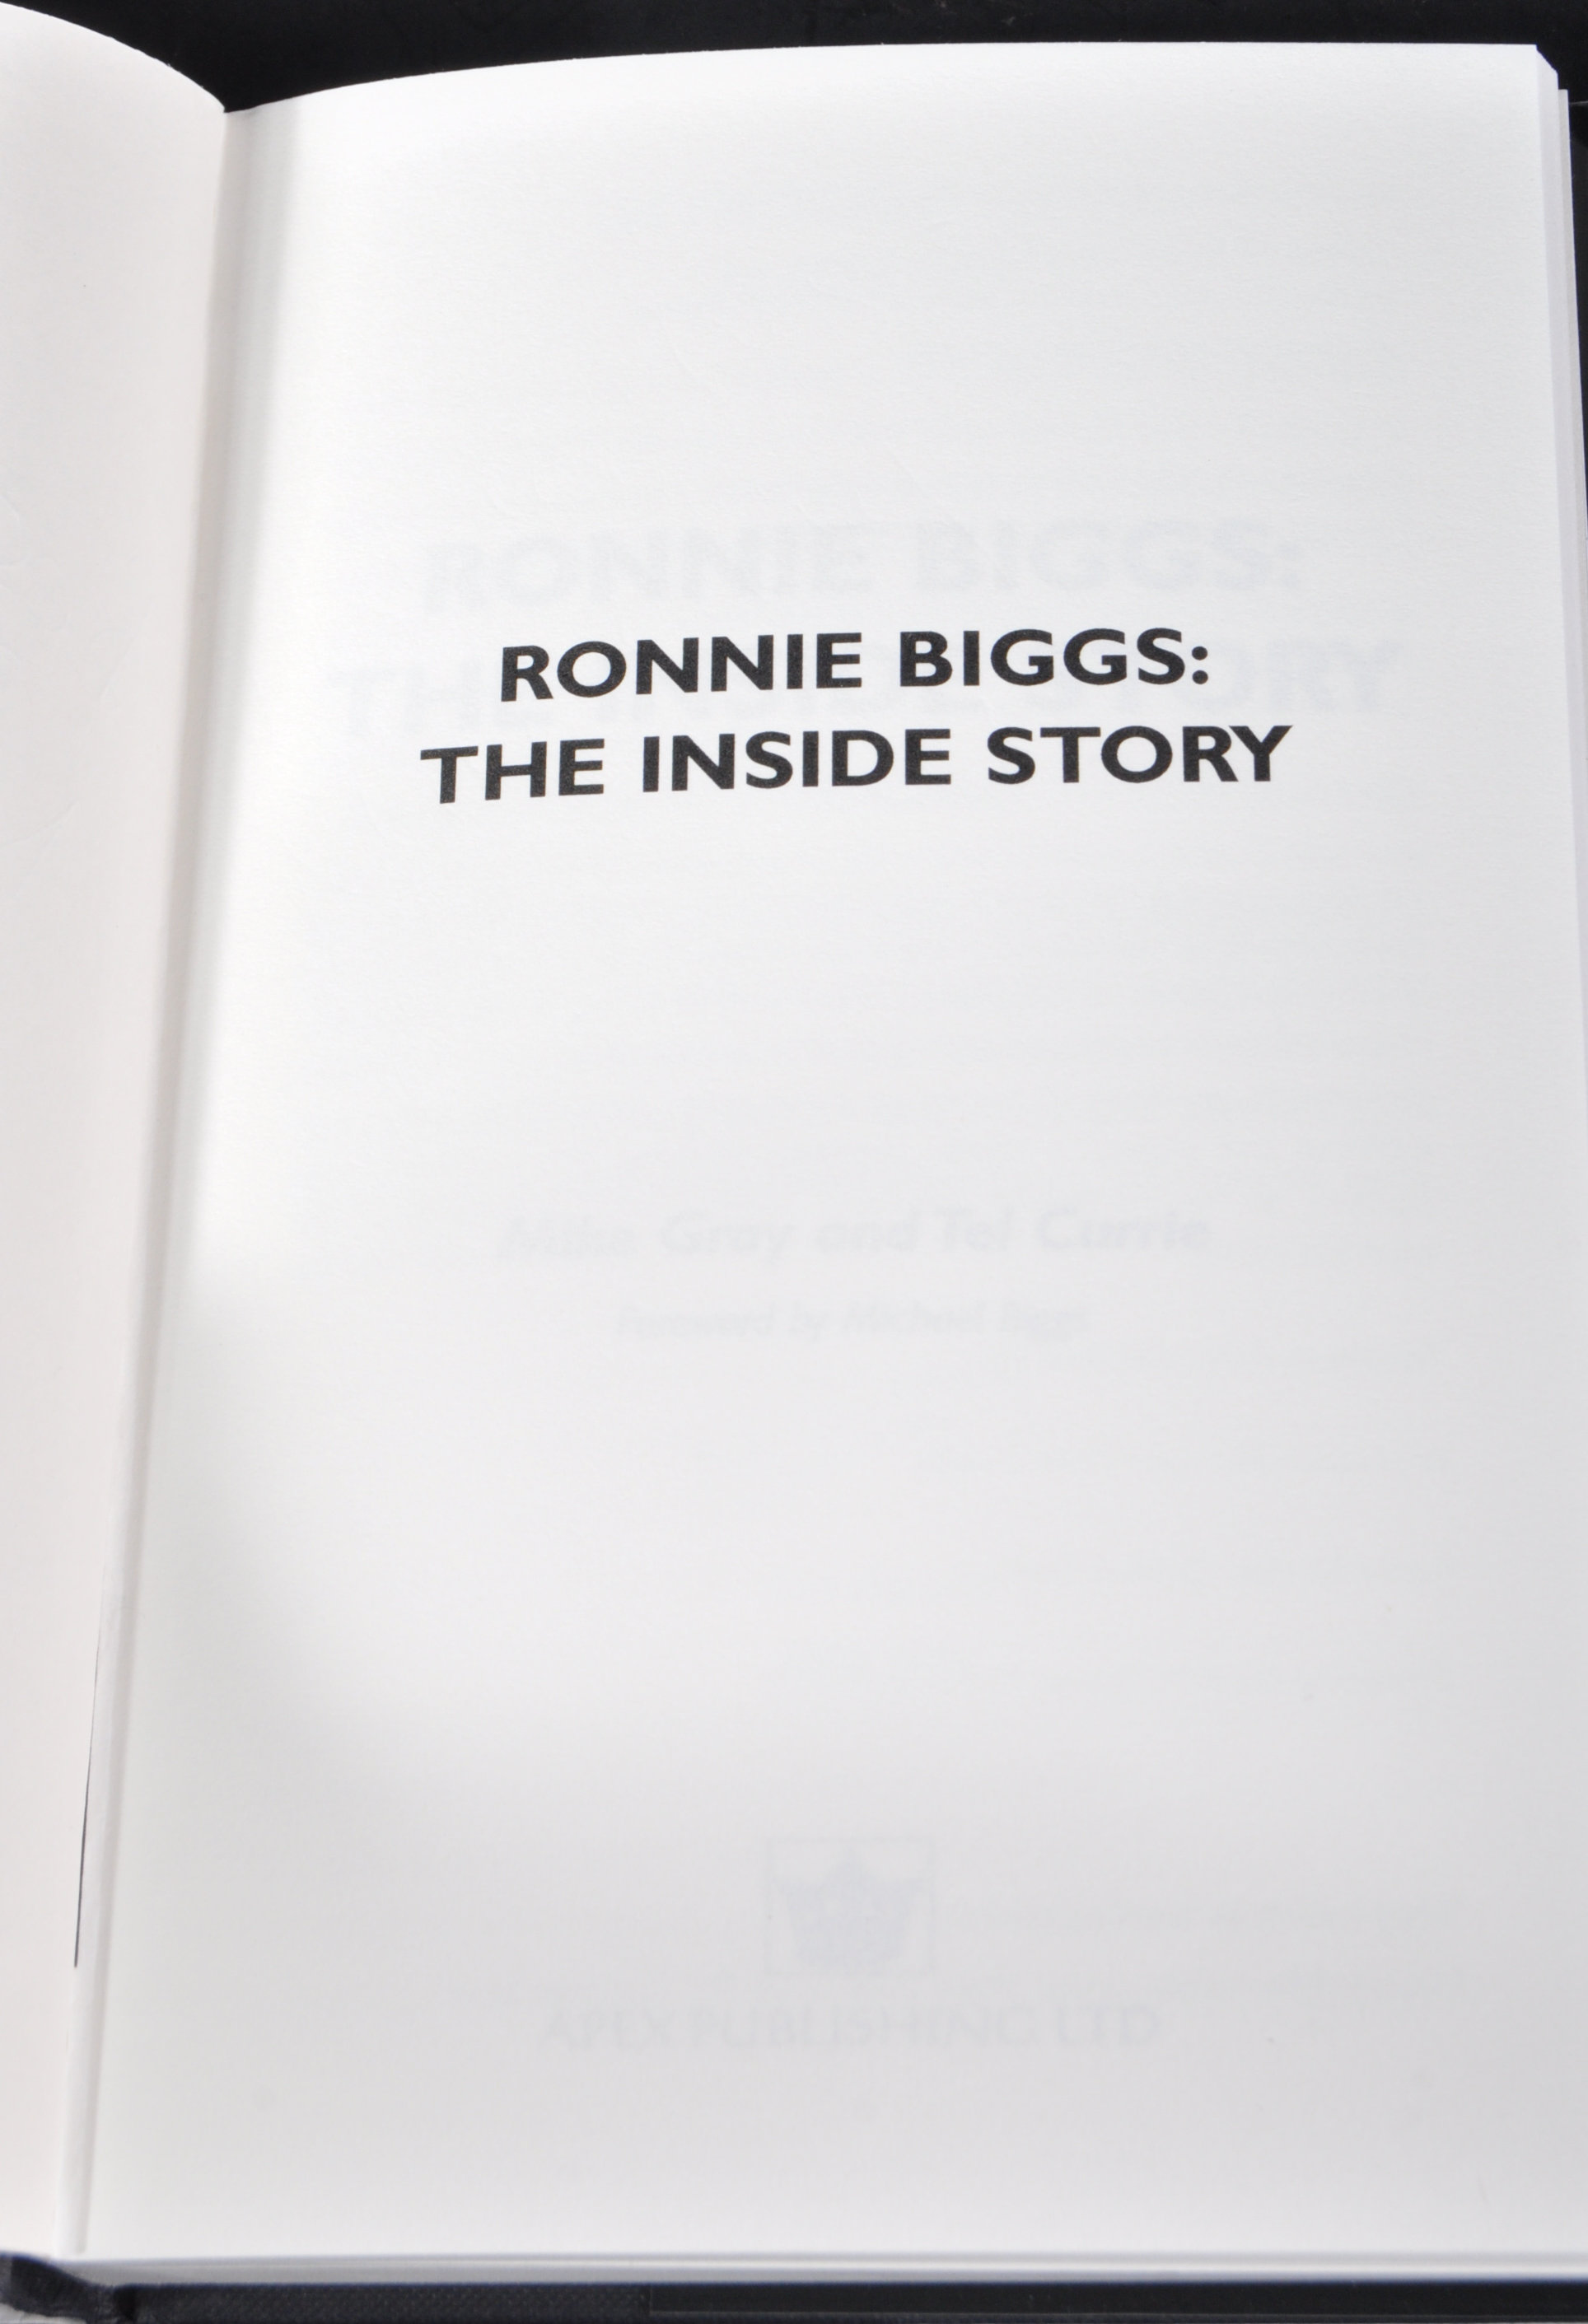 GREAT TRAIN ROBBERY - RONNIE BIGGS THE INSIDE STORY SIGNED - Image 3 of 6